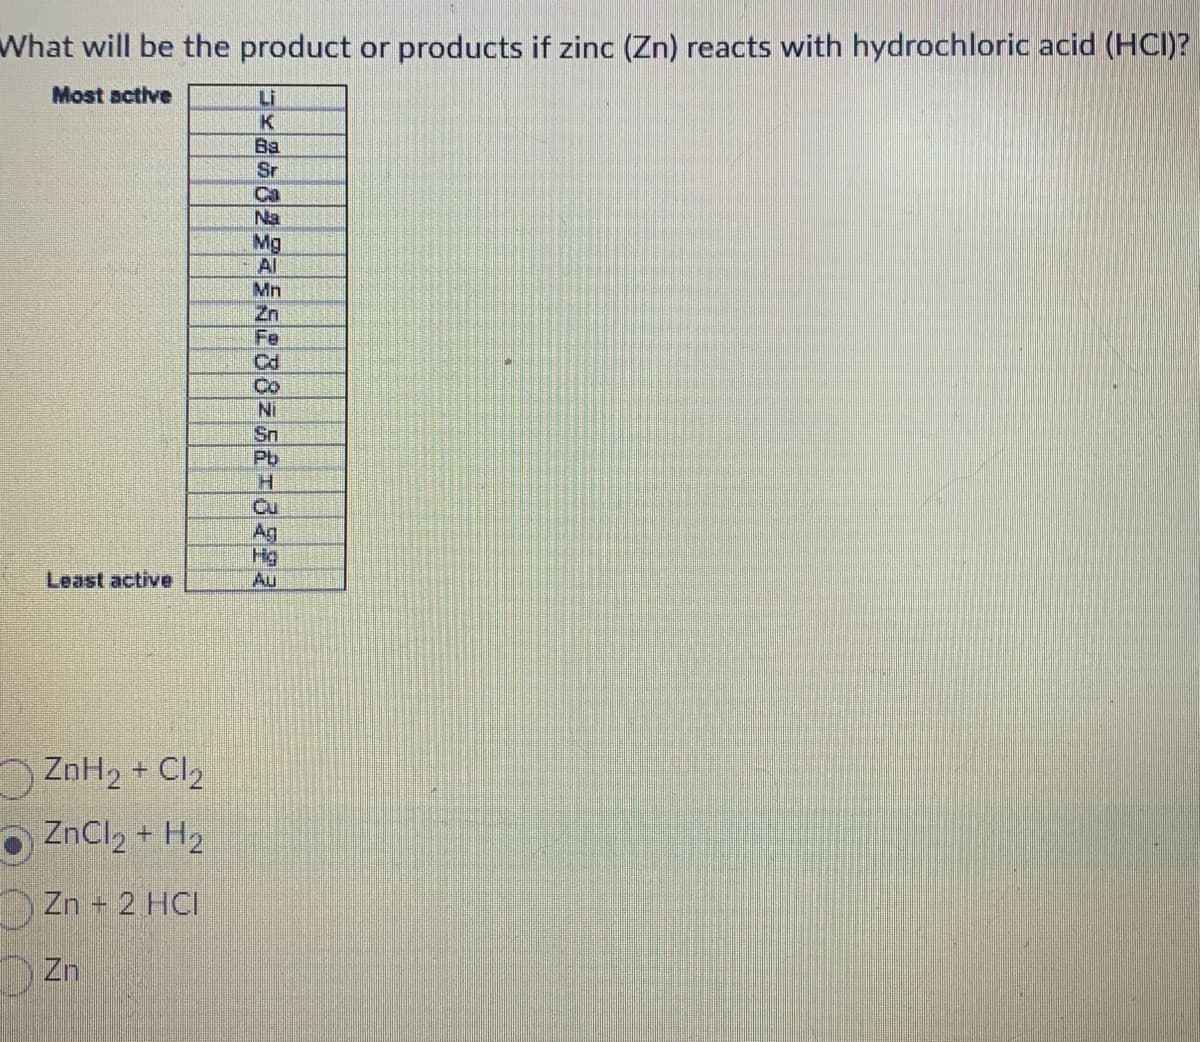 What will be the product or products if zinc (Zn) reacts with hydrochloric acid (HCI)?
Most active
Least active
ZnH₂ + Cl₂
ZnCl₂ + H₂
Zn + 2 HCI
Zn
x8682528825213722
Mg
Mn
Cd